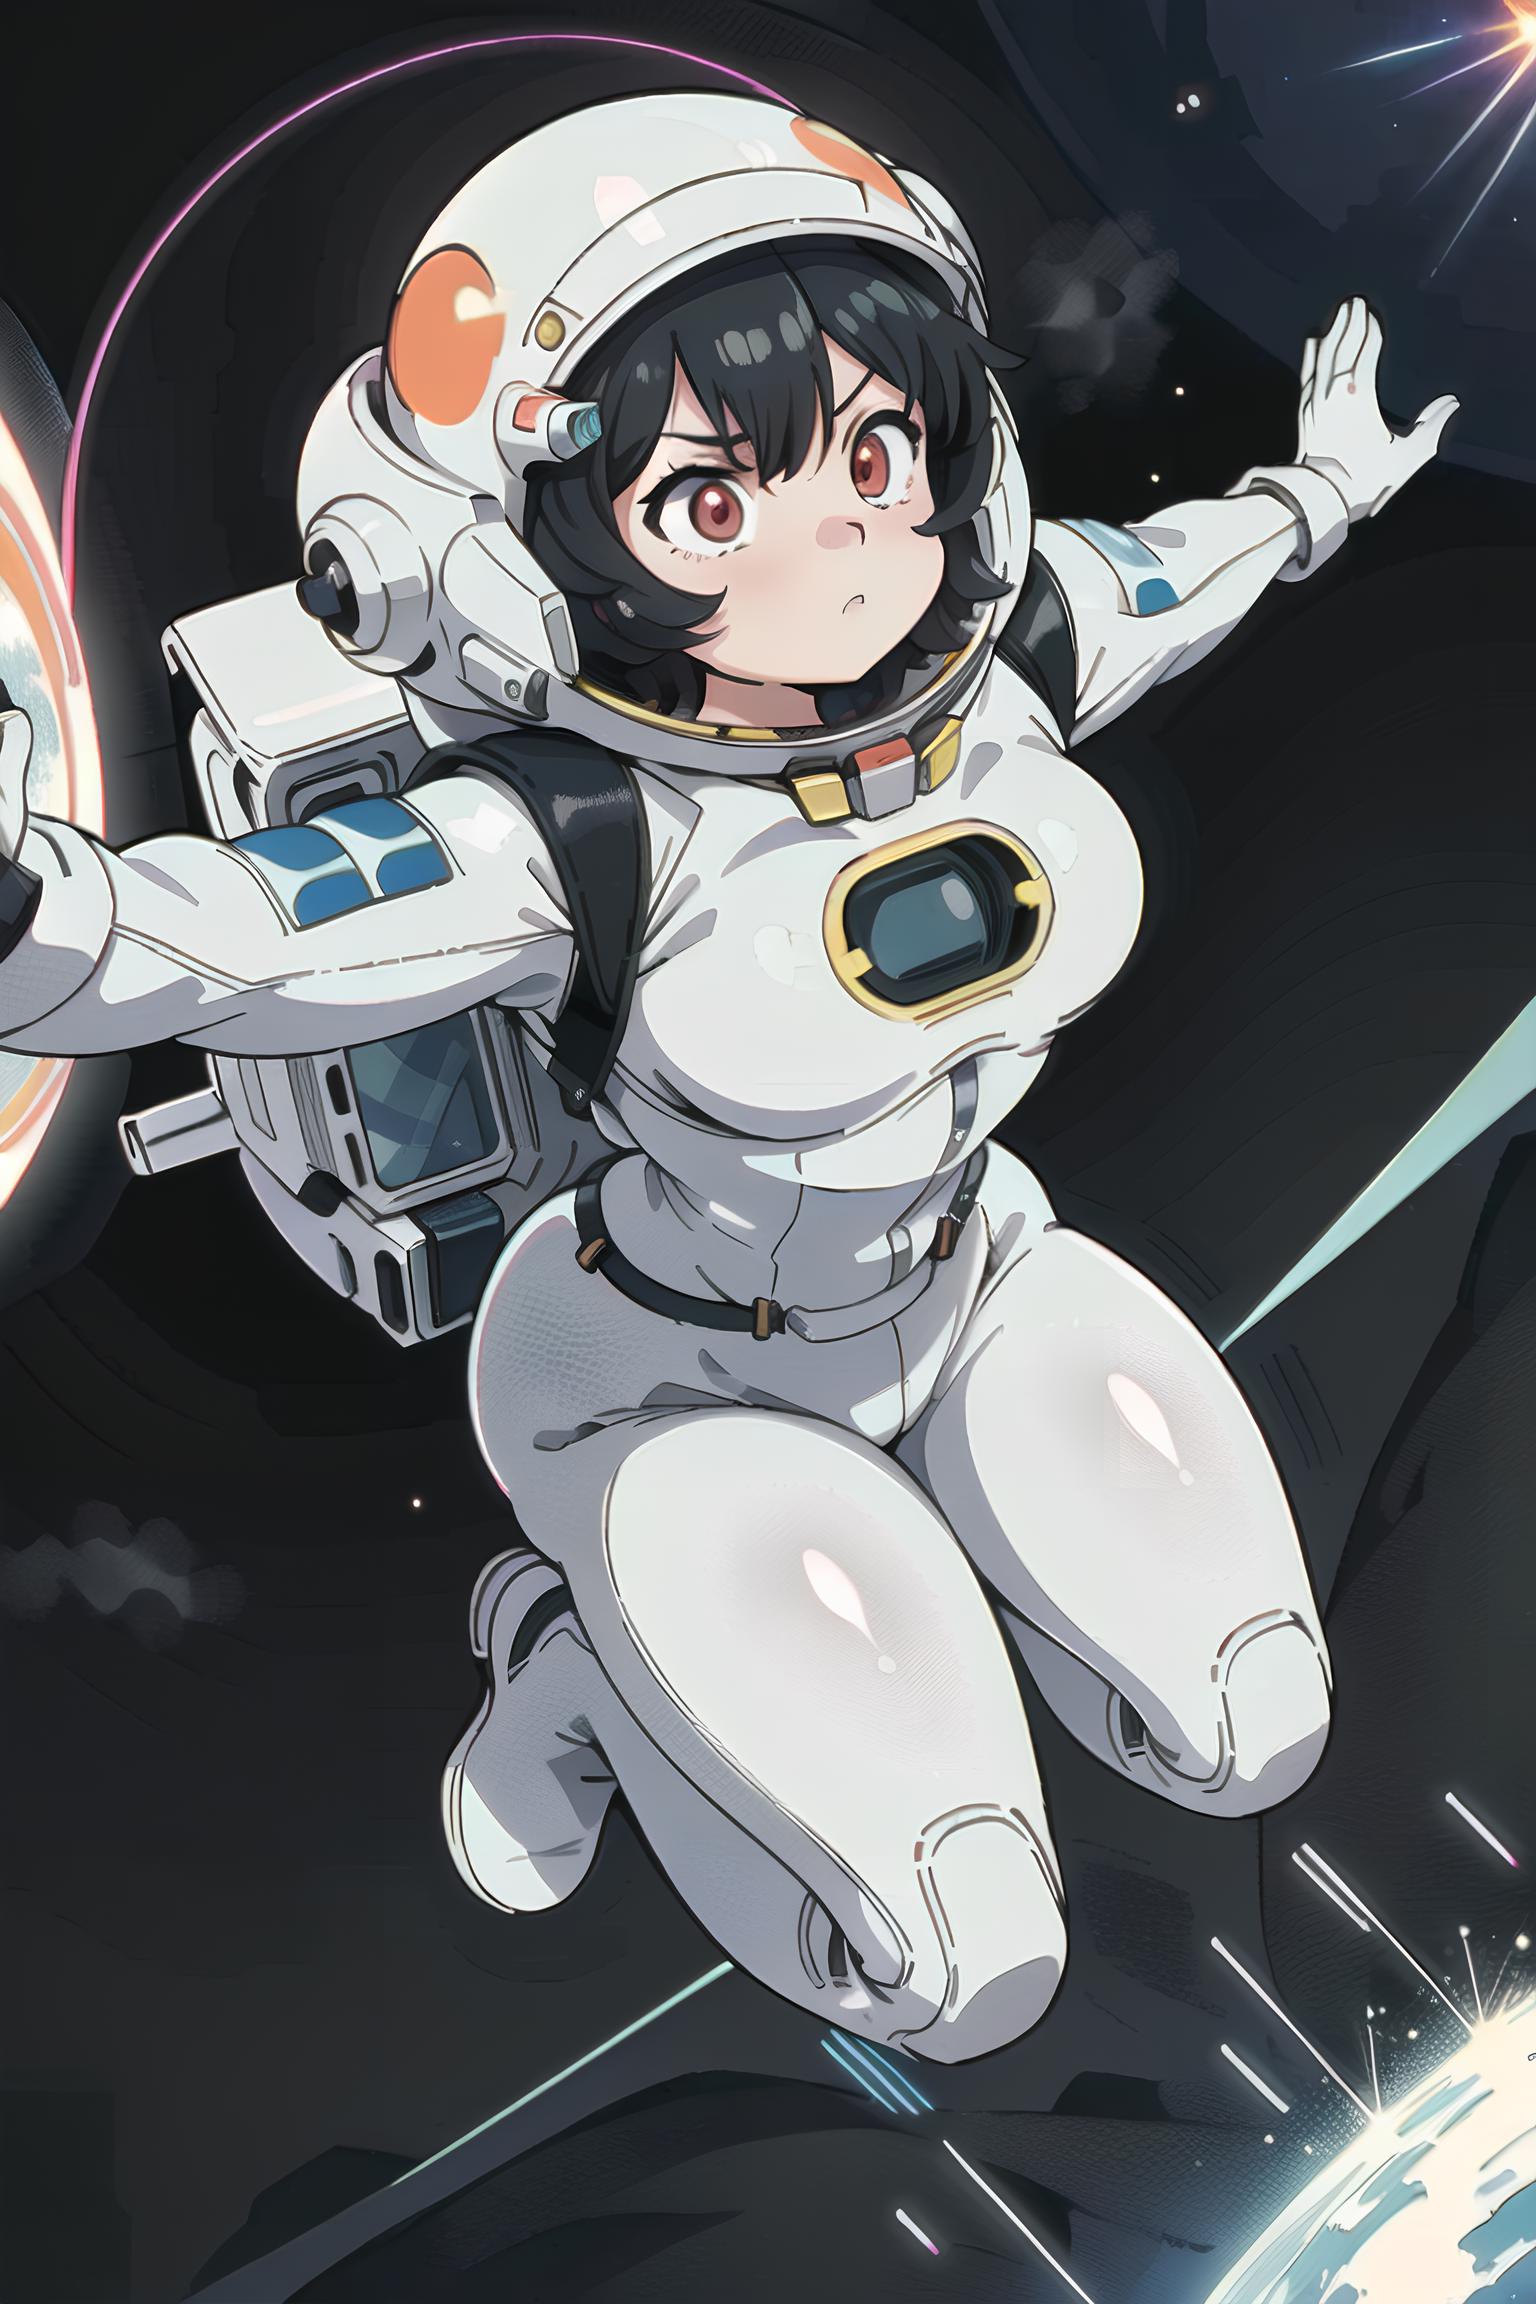 A woman wearing a white space suit and holding onto a rocket ship.